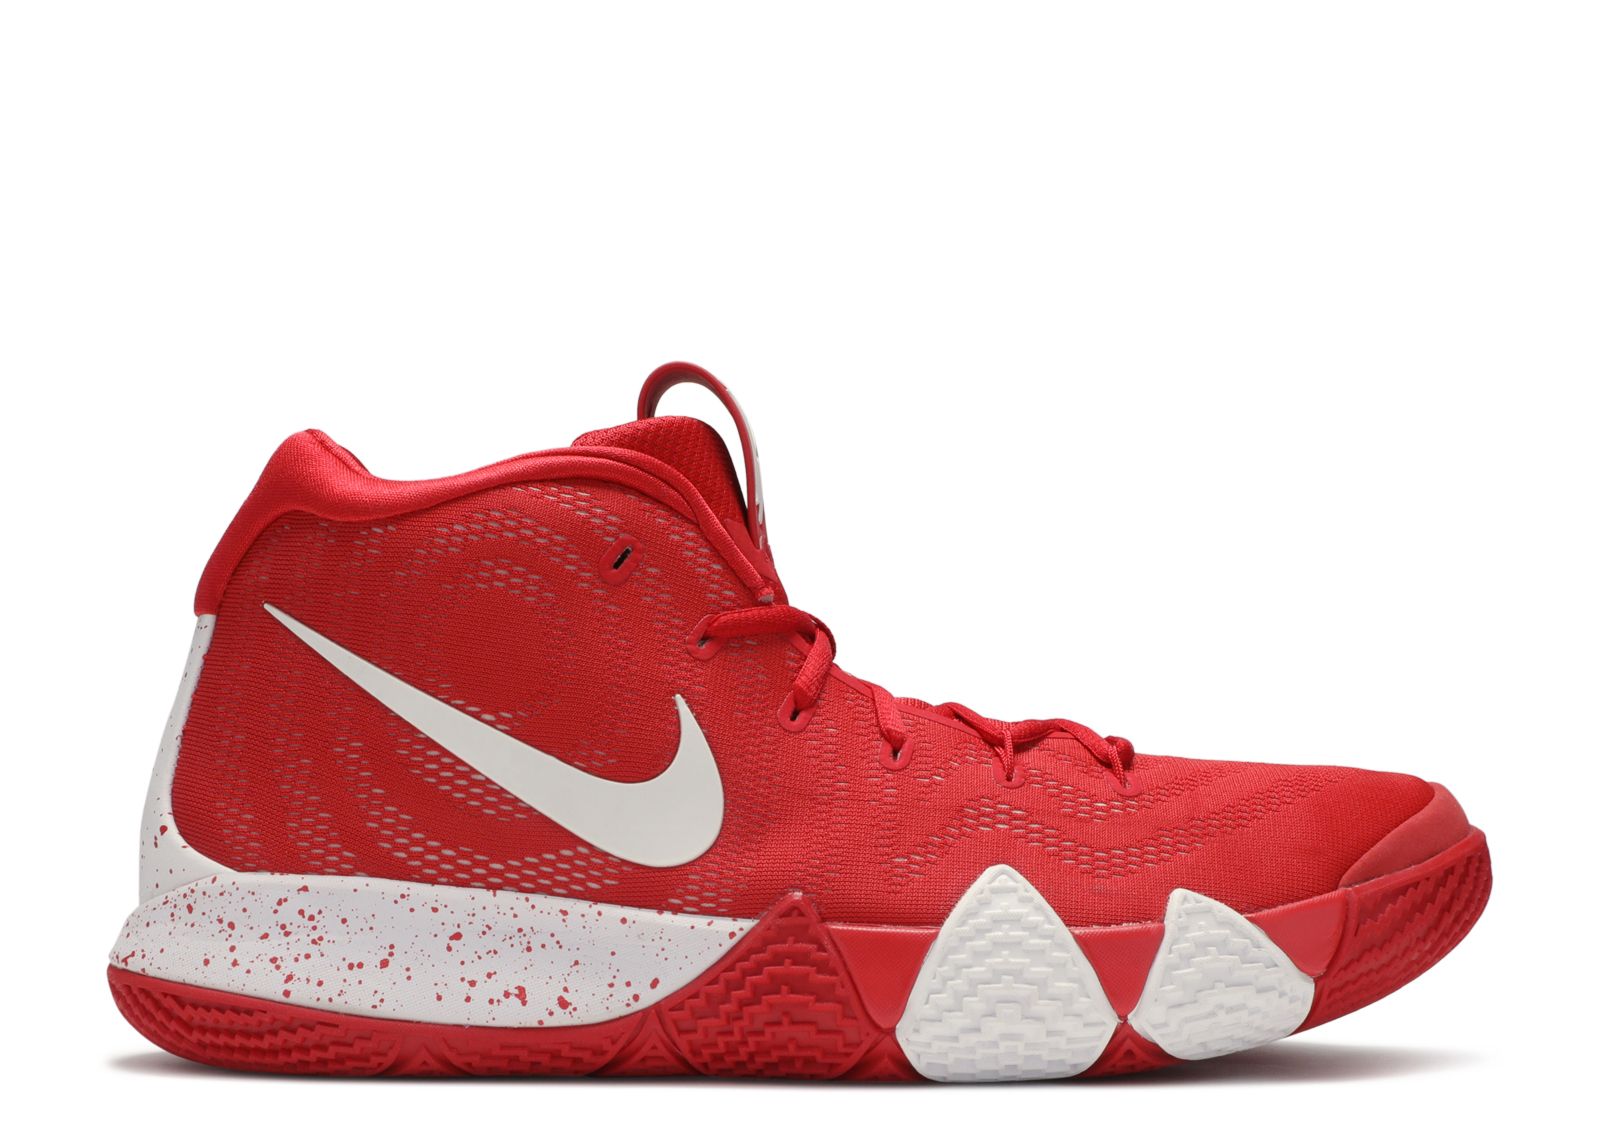 kyrie 4 red and black